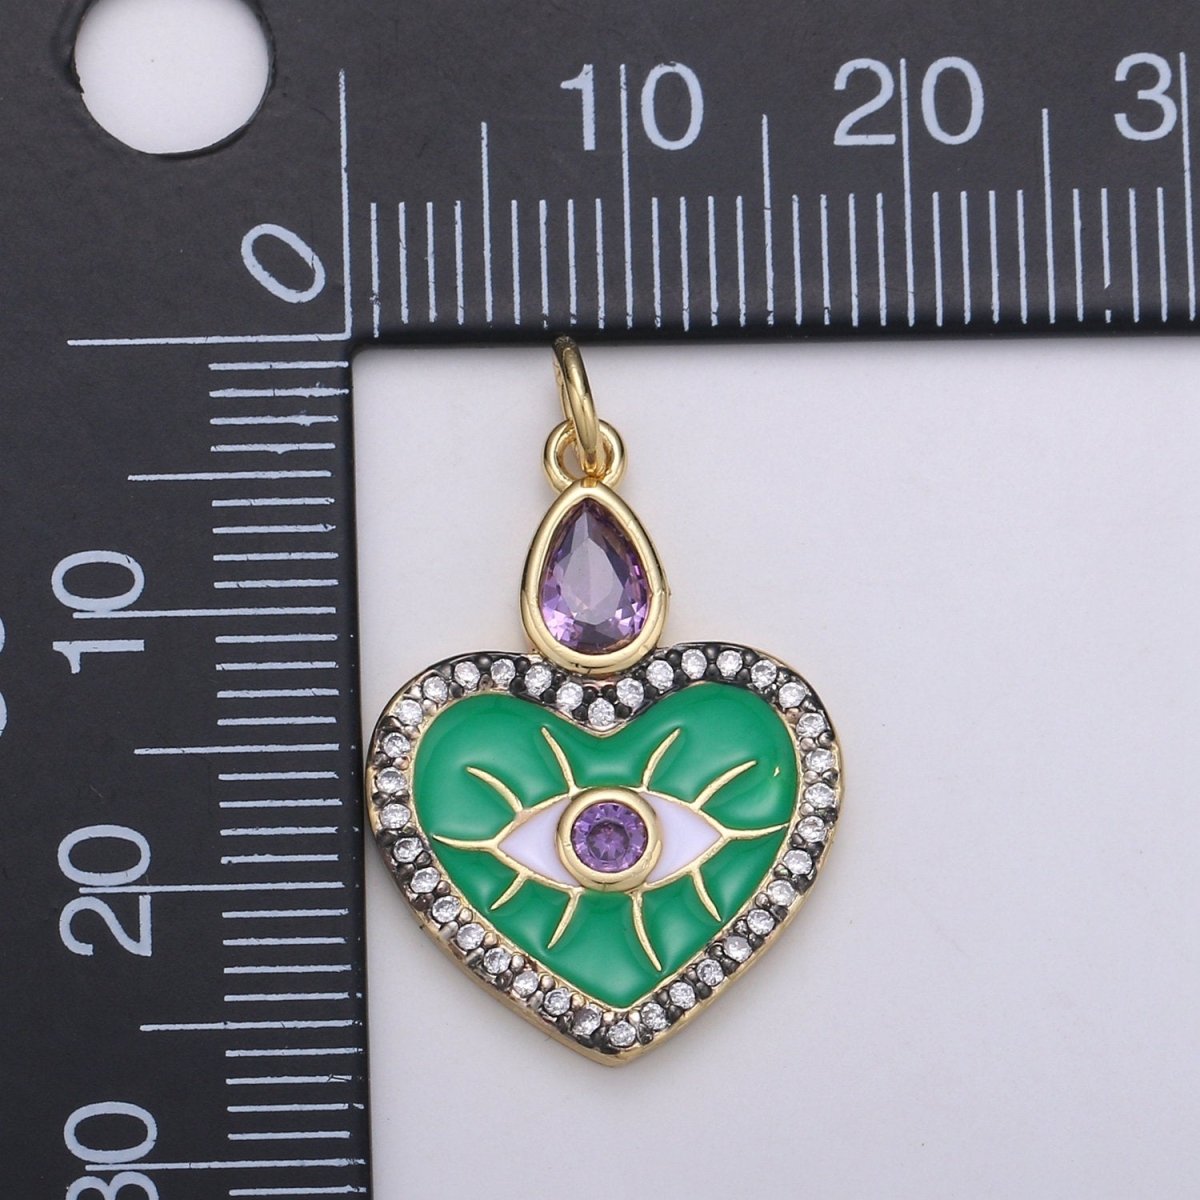 Enamel Evil Eye charm, Micro Pave Evil Eye Pendant for Amulet Jewelry Making Supply Protection Jewelry Green Evil Eye Heart Charm D-719 - DLUXCA